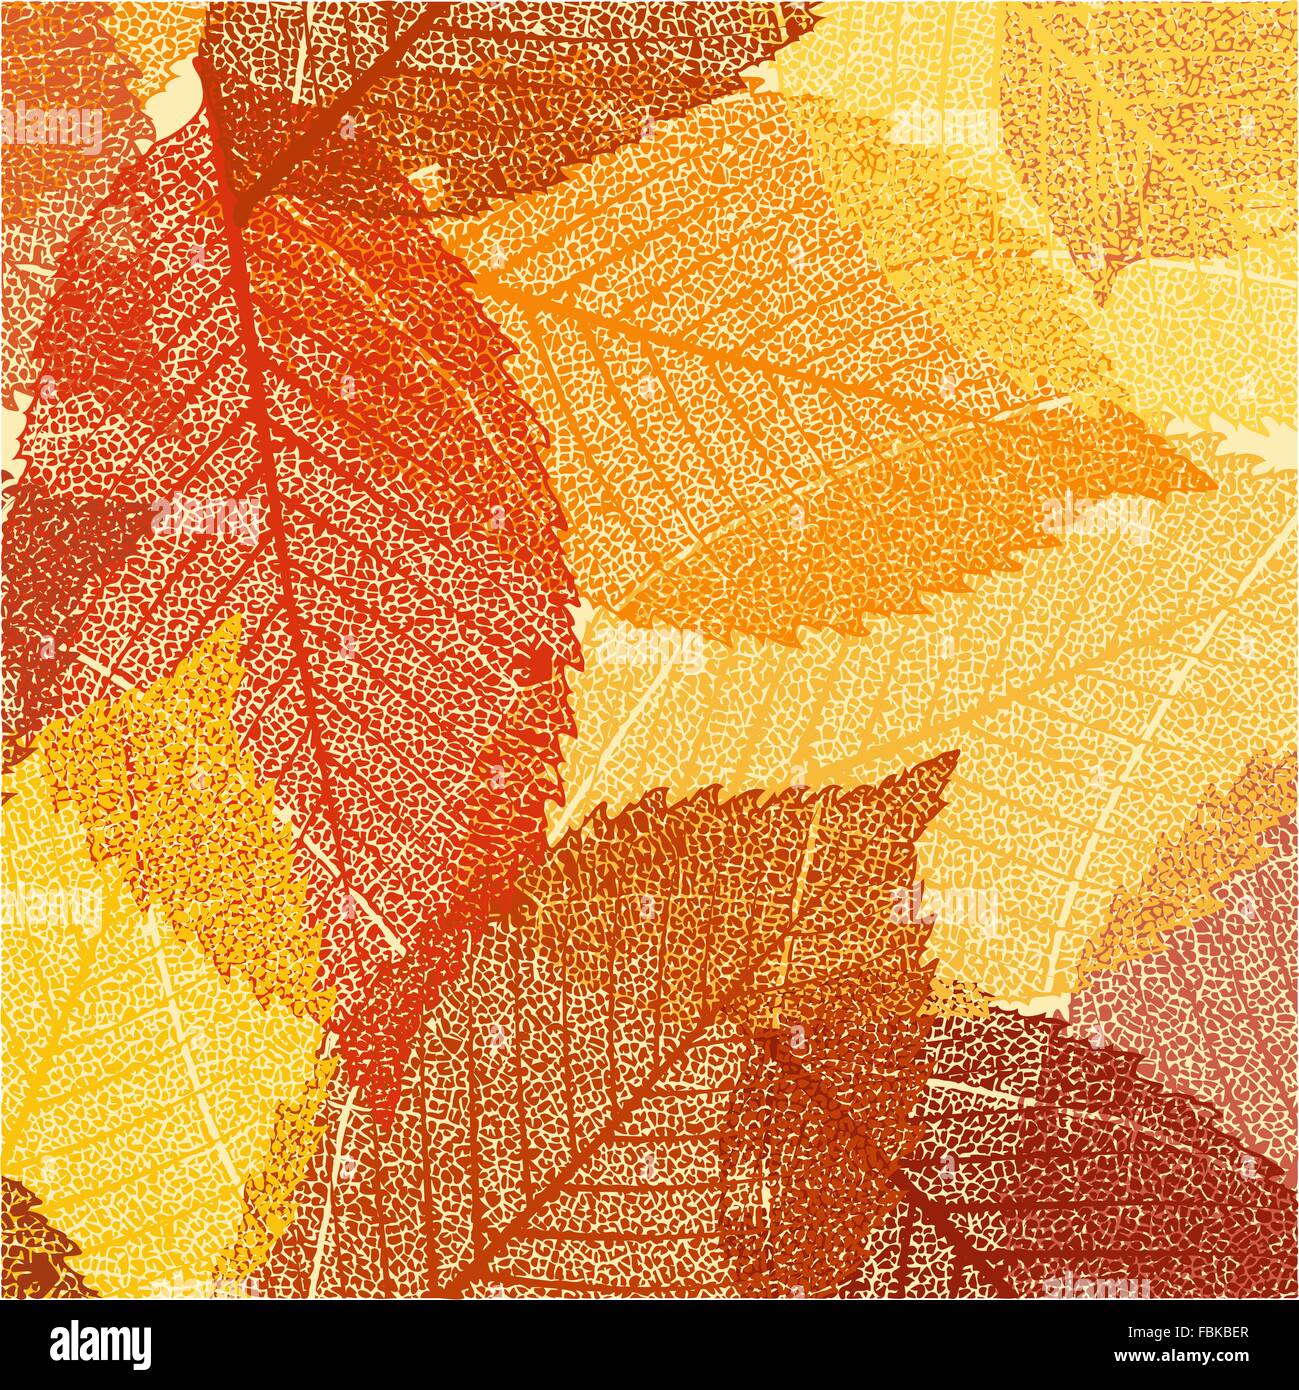 dry-autumn-leaves-template-eps-8-stock-vector-image-art-alamy